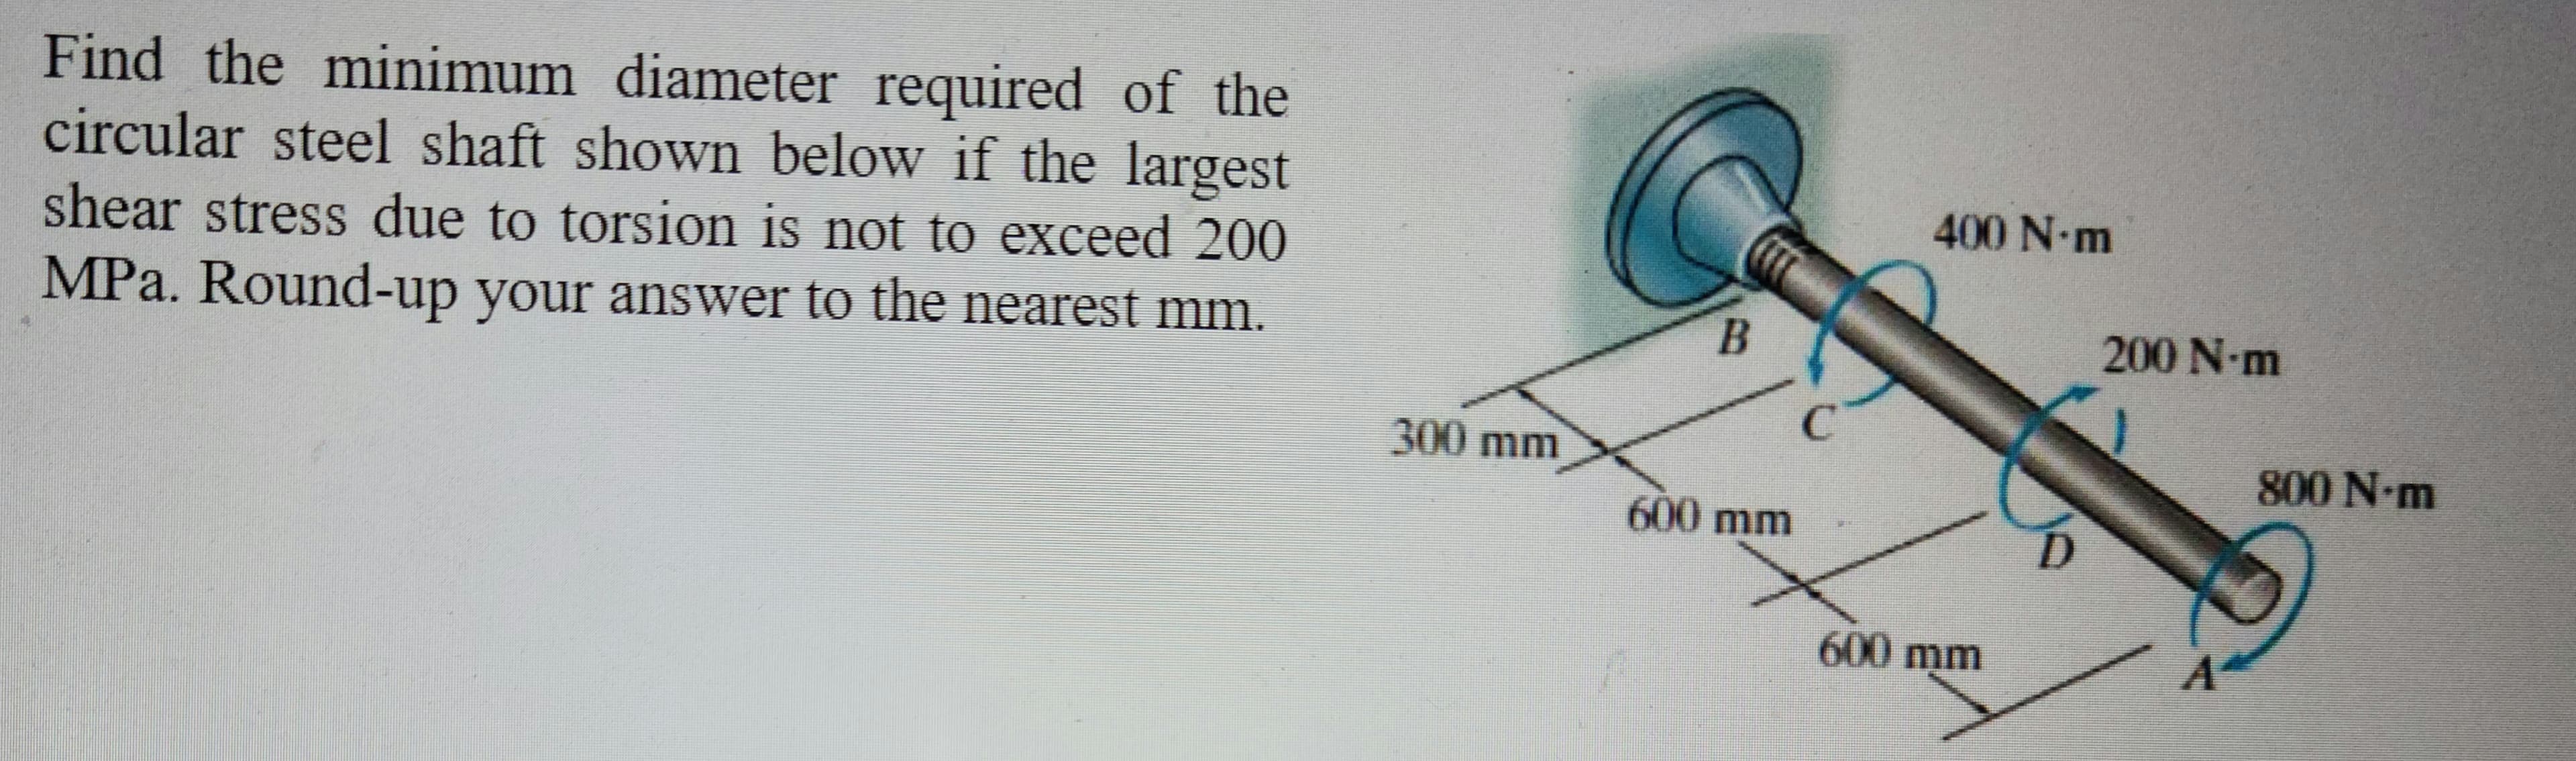 Find the minimum diameter required of the
circular steel shaft shown below if the largest
shear stress due to torsion is not to exceed 200
MPa. Round-up your answer to the nearest mm.
